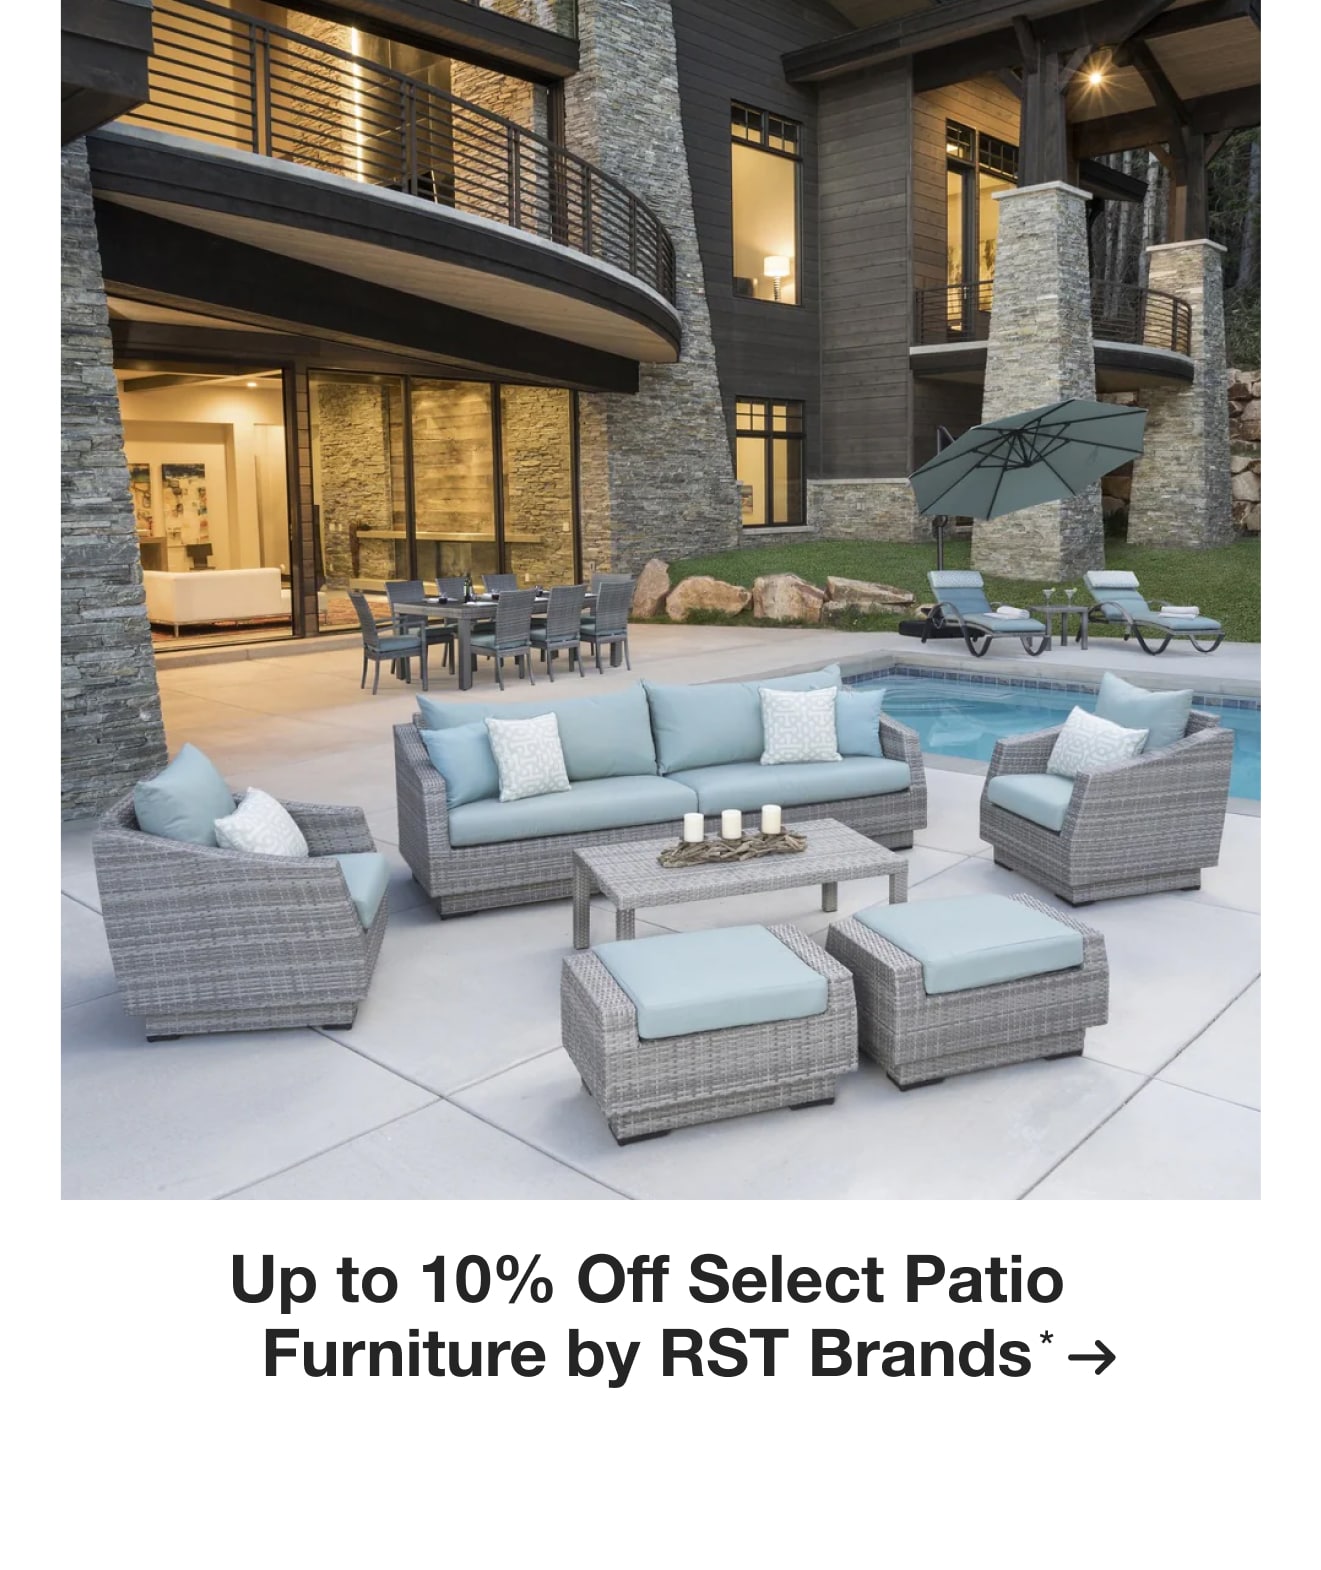 Up to 10% Offf Select Patio Furniture by RST Brands*